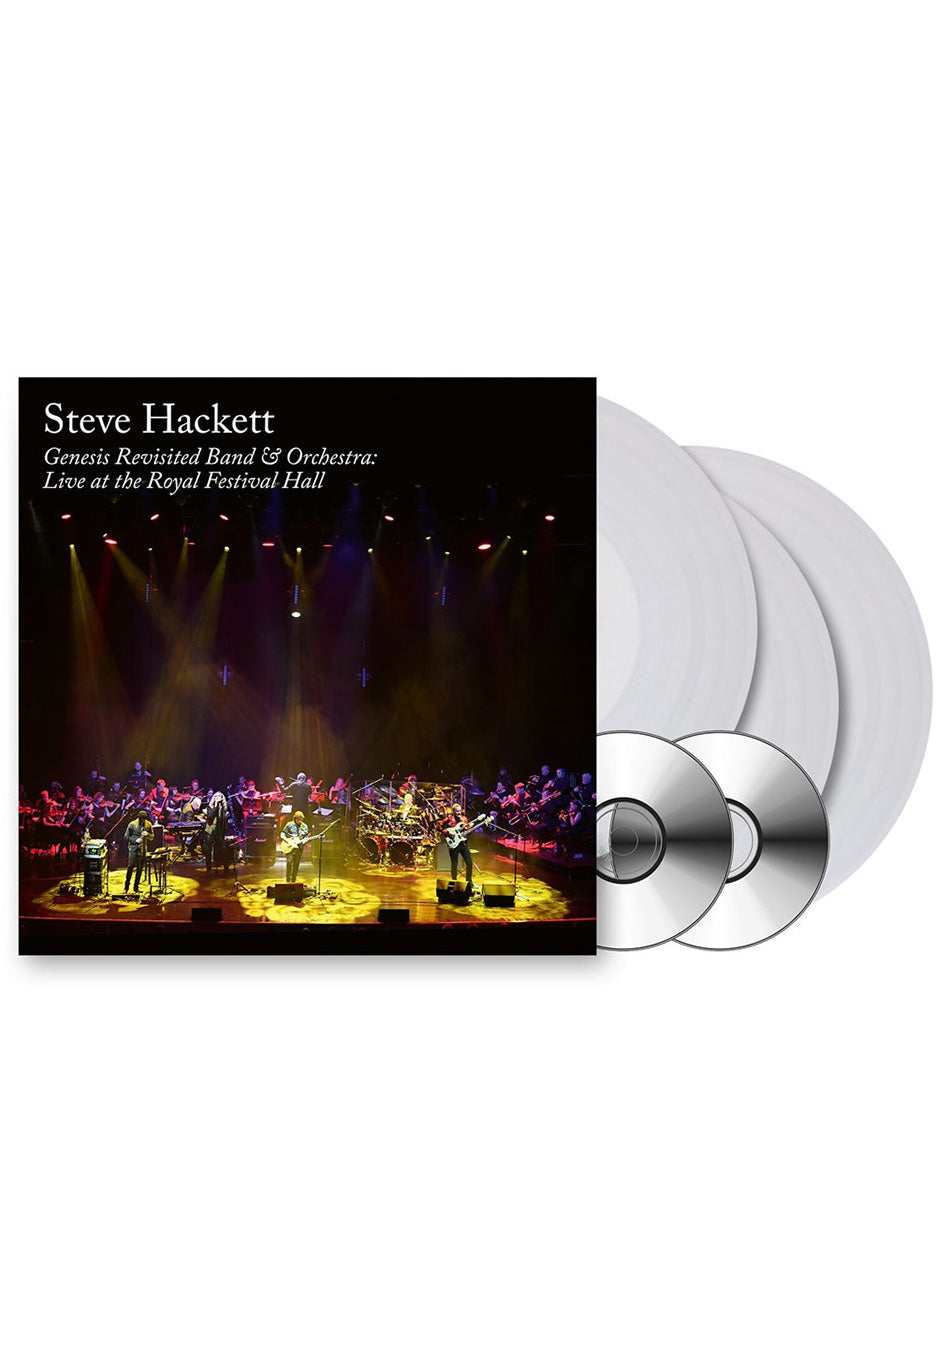 Steve Hackett - Genesis Revisited Band & Orchestra: Live (2022 Reissue) Clear - Colored 3 Vinyl + 2 CD